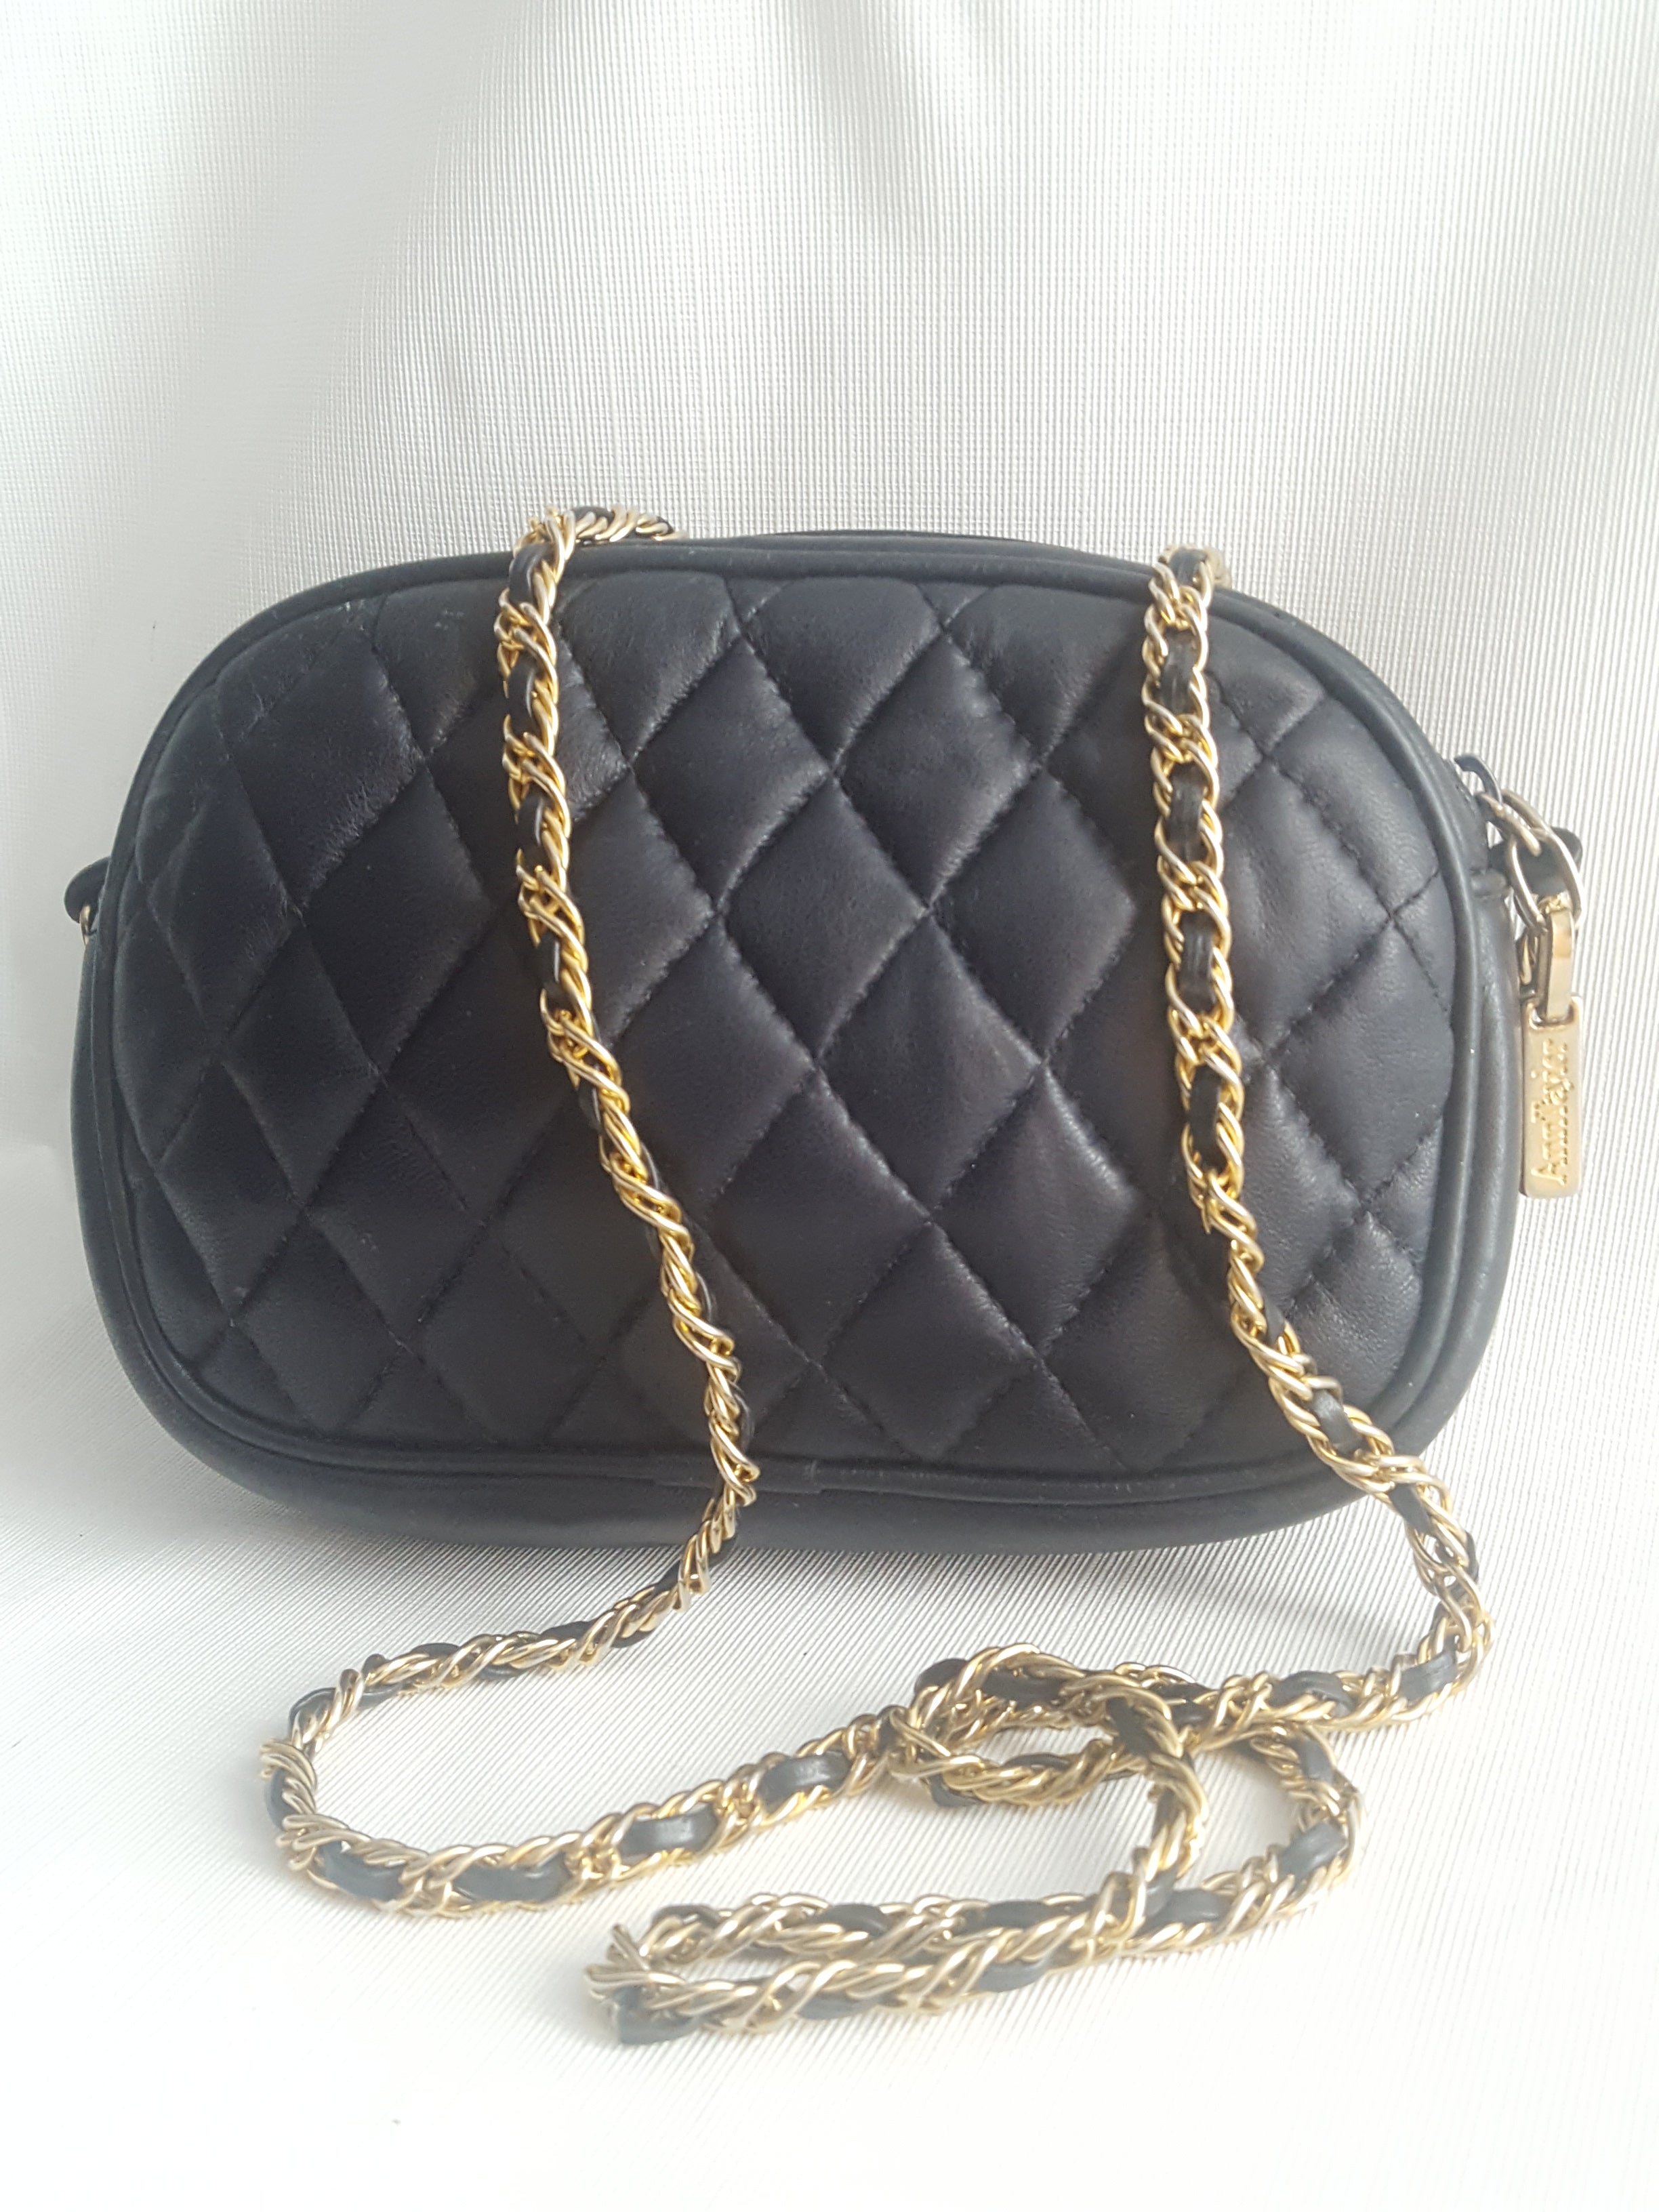 Jay Herbert New York Vintage Black Patent Leather Quilted Shoulder Bag Size  One Size - $50 - From Joanna